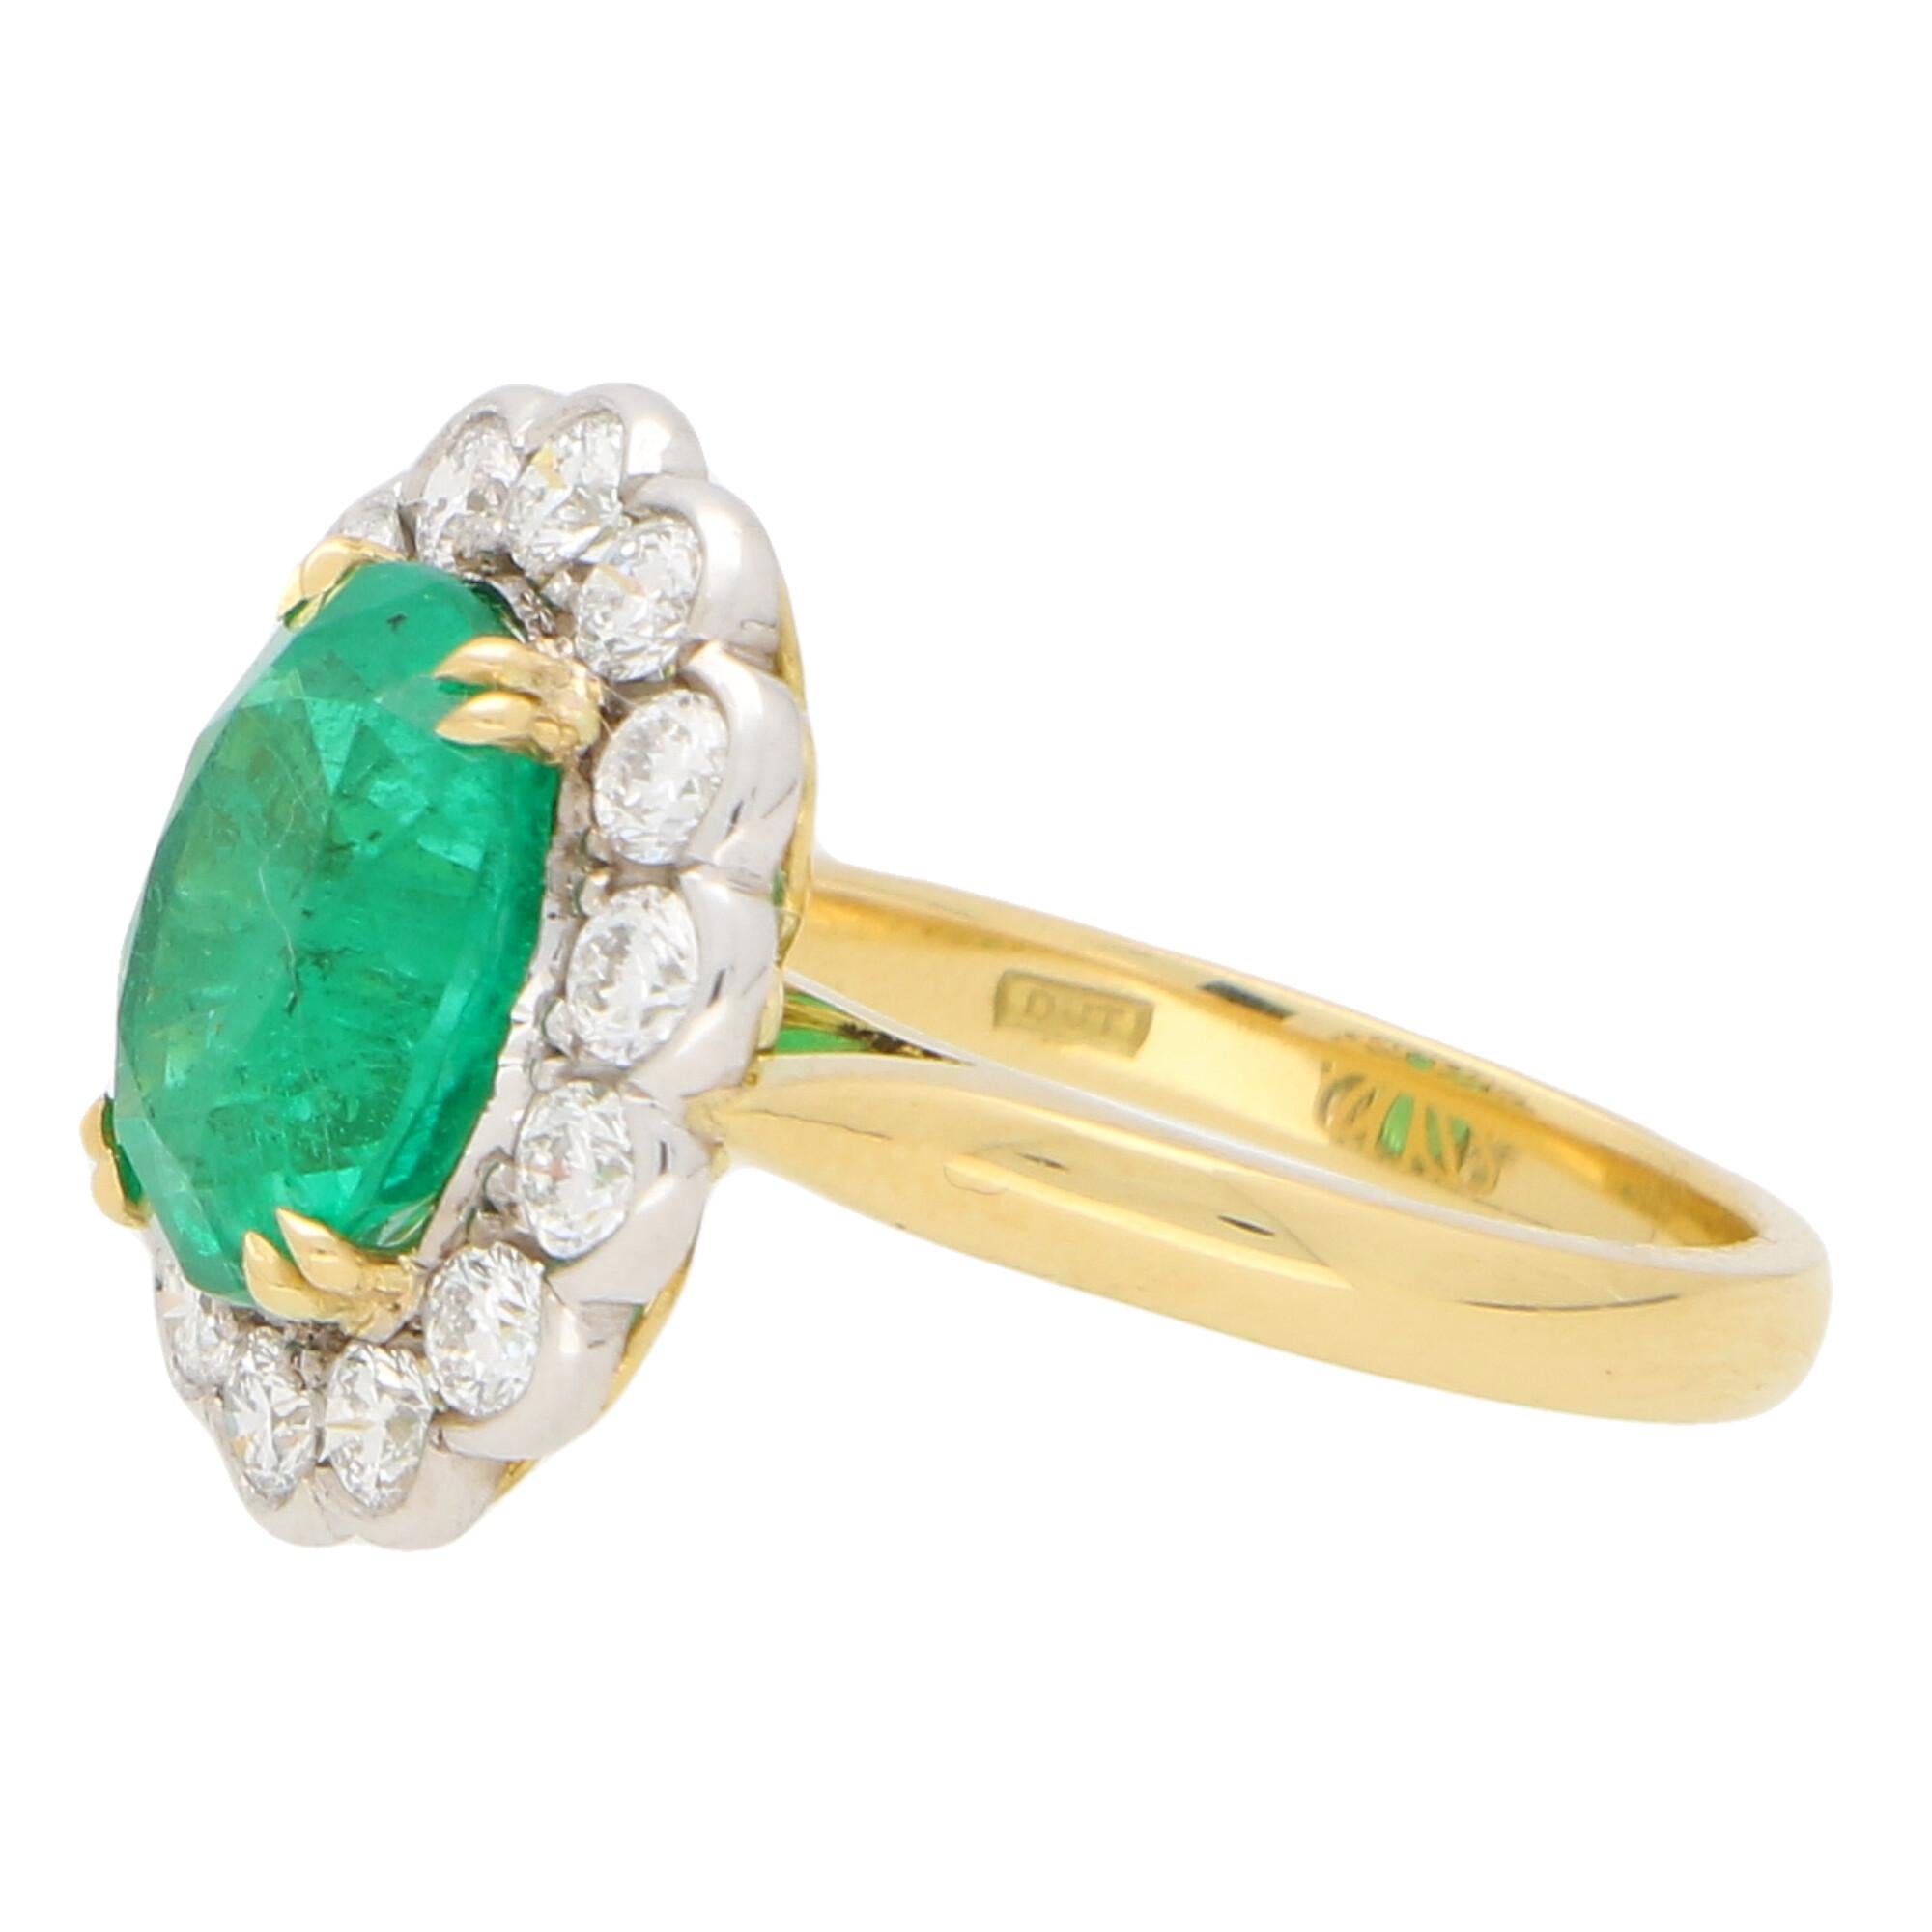 Modern Emerald and Diamond Cluster Ring Set in 18 Karat Yellow and White Gold